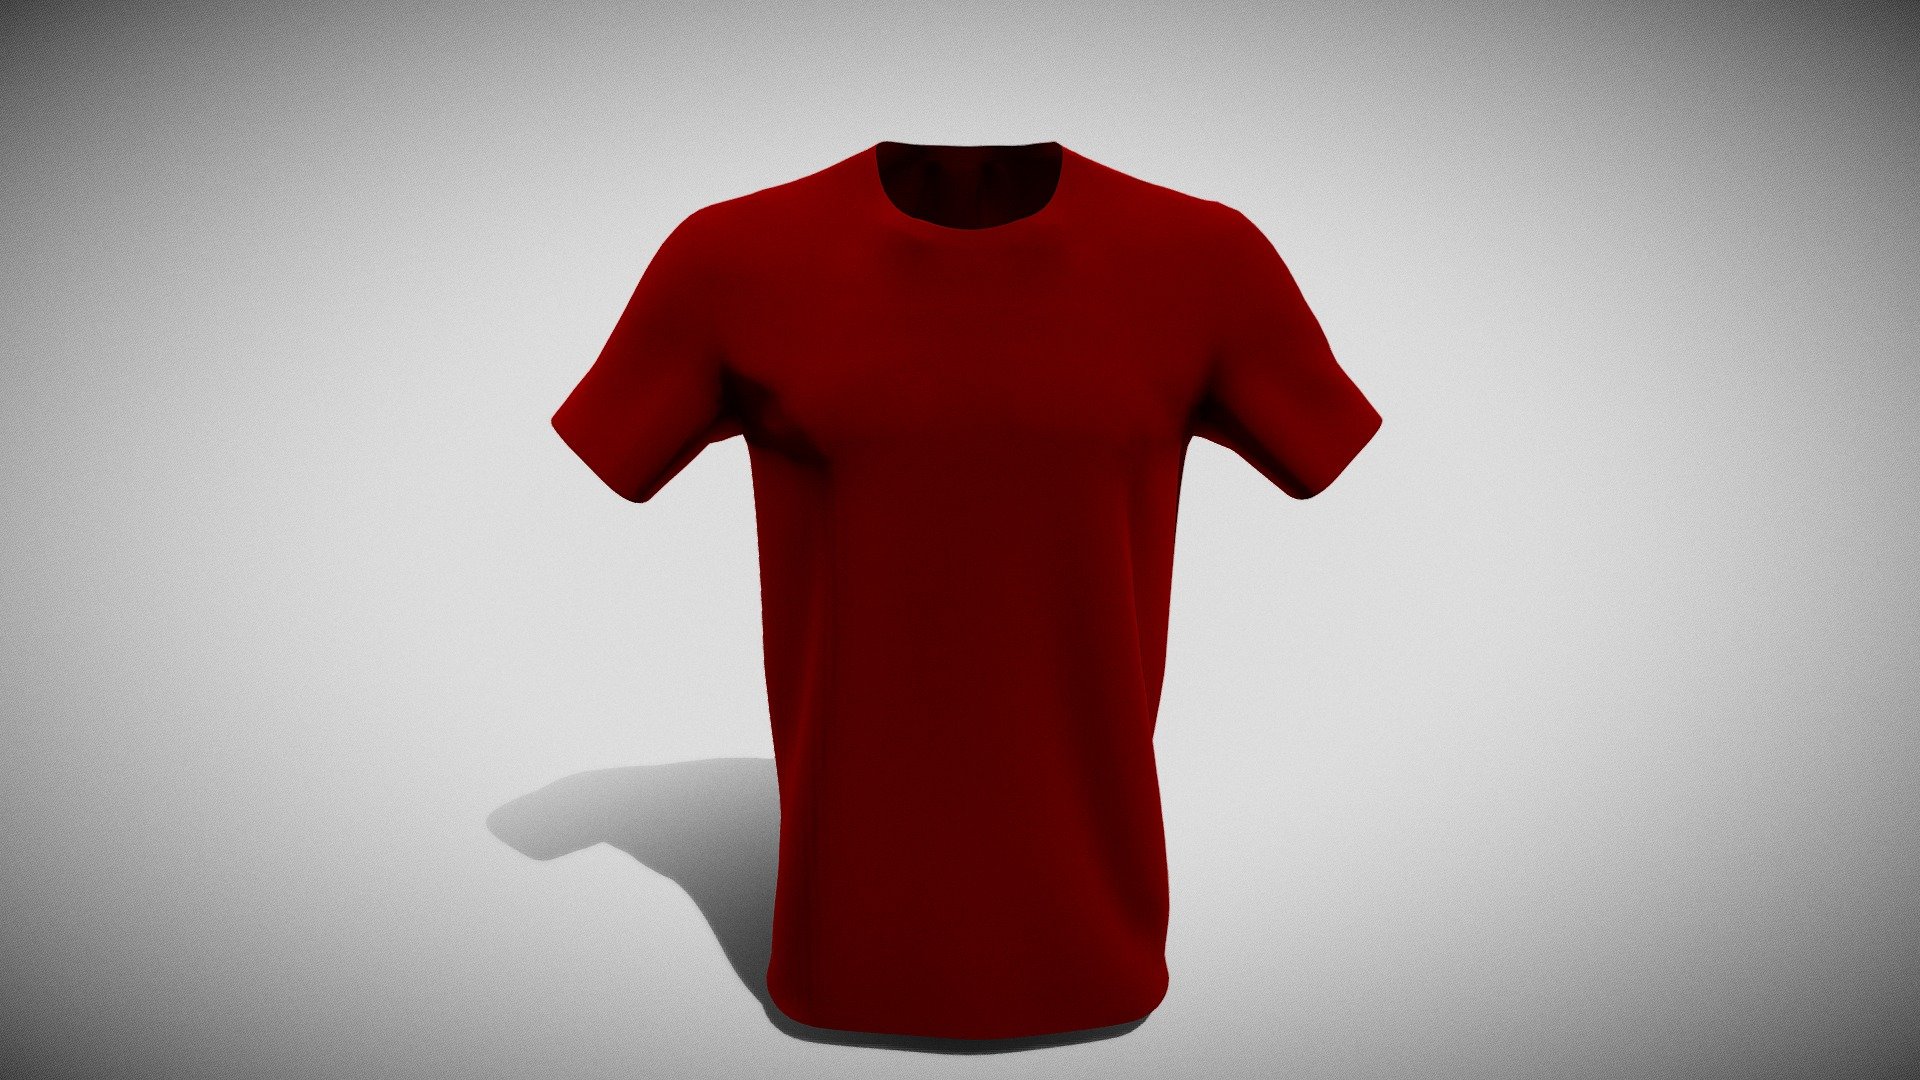 Tshirt
A T-shirt is a style of fabric shirt named after the T shape of its body and sleeves. Traditionally it has short sleeves and a round neckline, known as a crew neck, which lacks a collar. T-shirts are generally made of a stretchy, light and inexpensive fabric and are easy to clean.


This model was created in marvelous designer &amp; Gimp.
This model was remeshed using the feature in marvelous designer
This model is ideal for games or character dress up. 
This model was uploaded in obj, Please also let me know what type of file you are looking for, will upload this model in various different files for you to download.
Please leave a like and subscribe if you like my models.


More models coming soon! - Standard T-shirt - Download Free 3D model by Pieter Ferreira (@Badboy17Aiden) 3d model